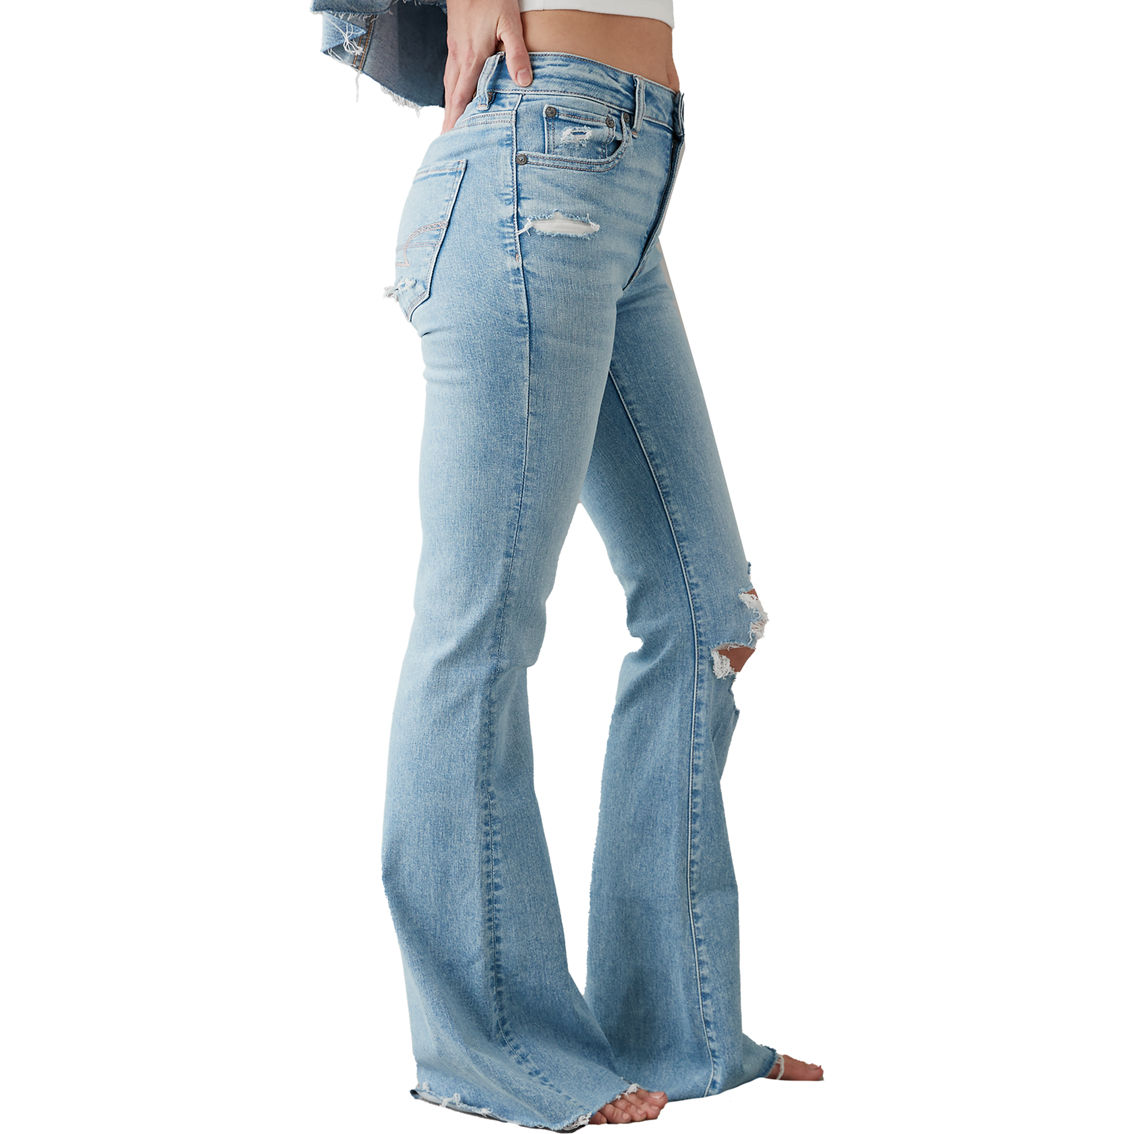 American Eagle Next Level Ripped High Rise Flare Jeans - Image 3 of 5